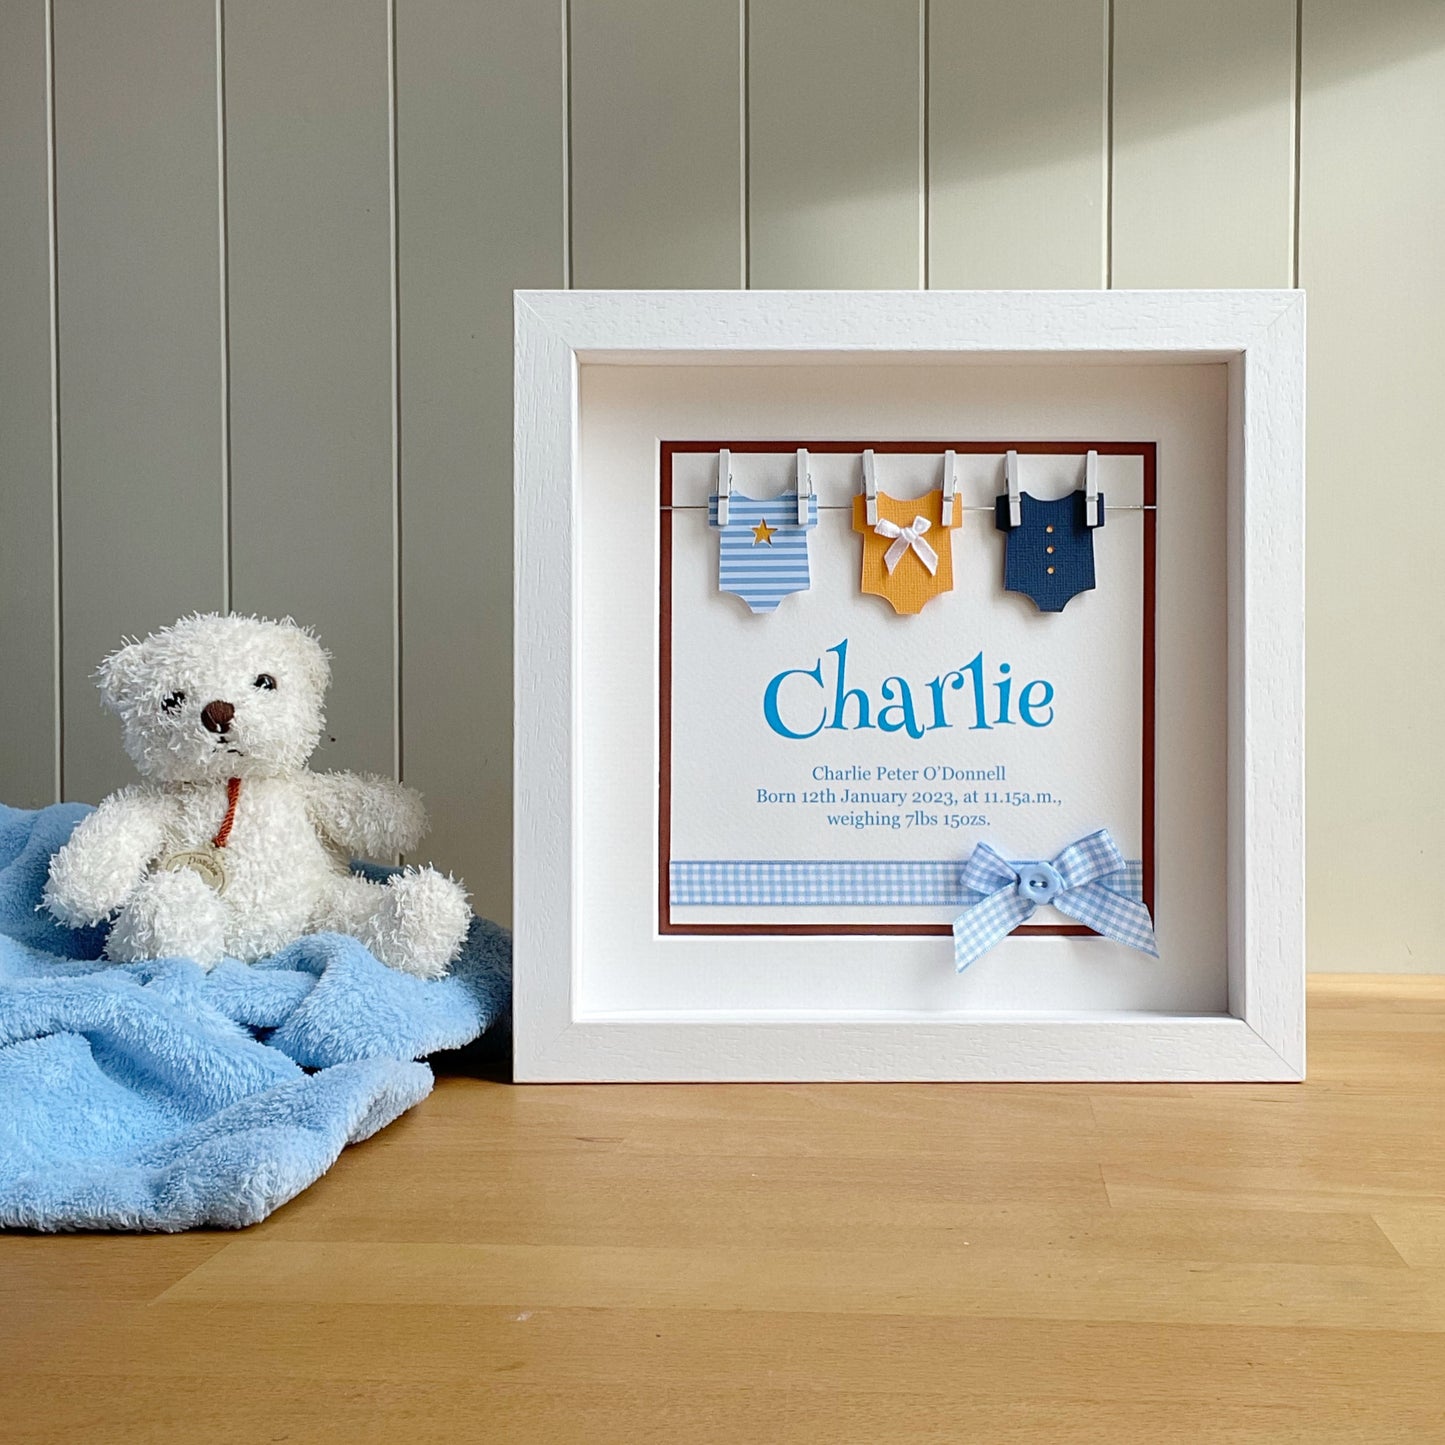 Baby boy’s vests handmade gift frame (Personalised & Made to order)